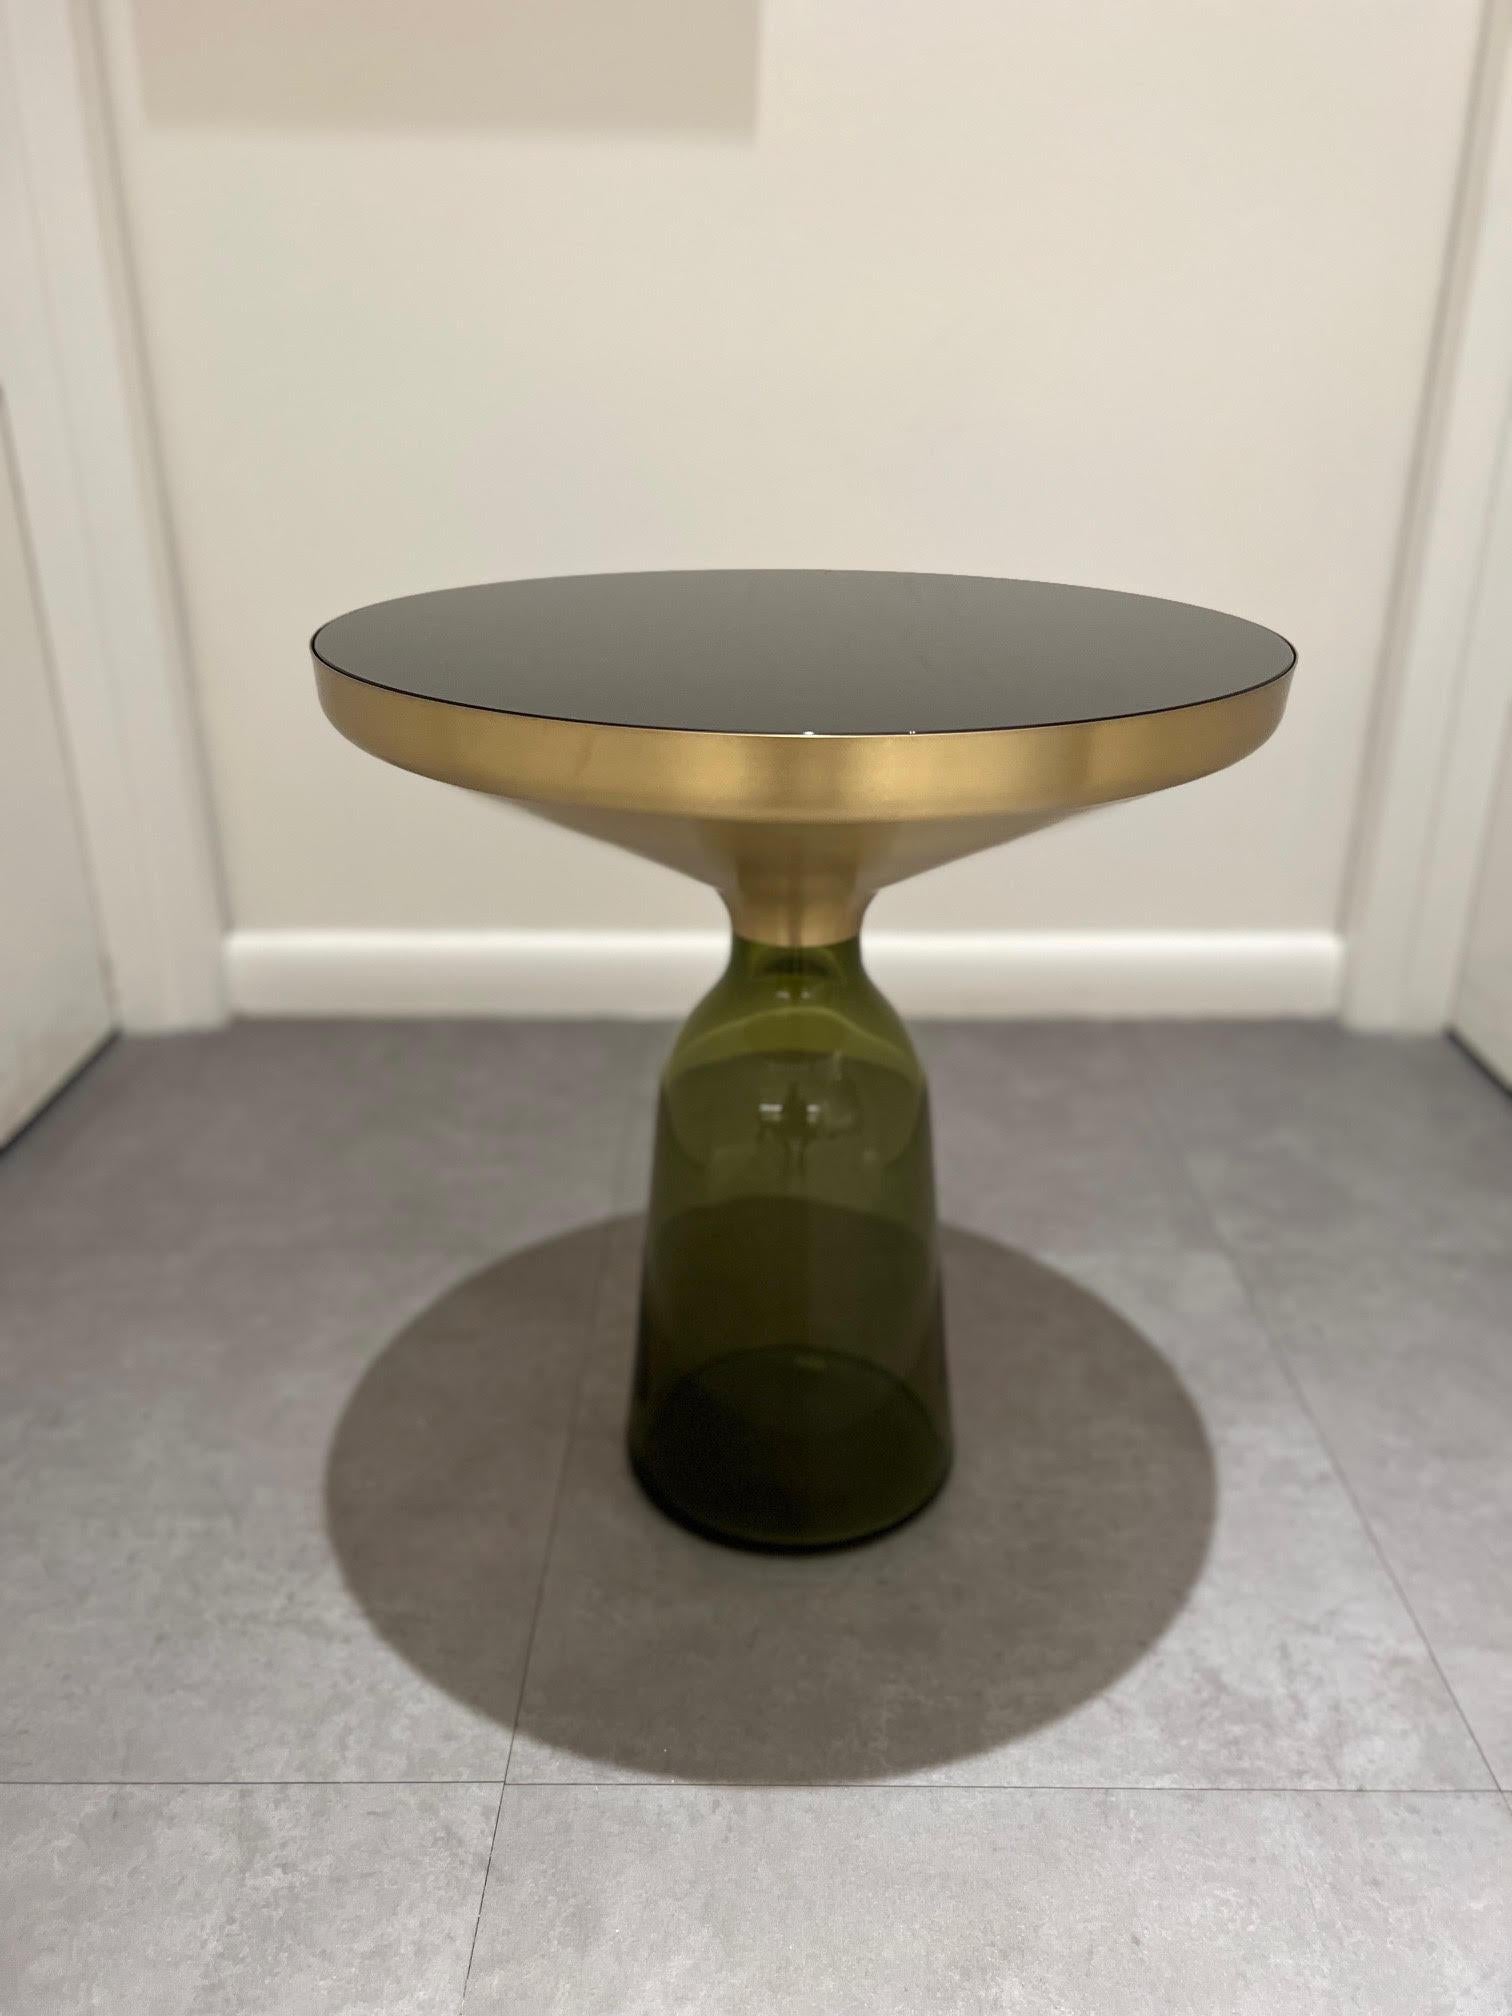 ClassiCon Bell Side Table in Brass and Topaz Designed by Sebastian Herkner In Excellent Condition For Sale In New York, NY